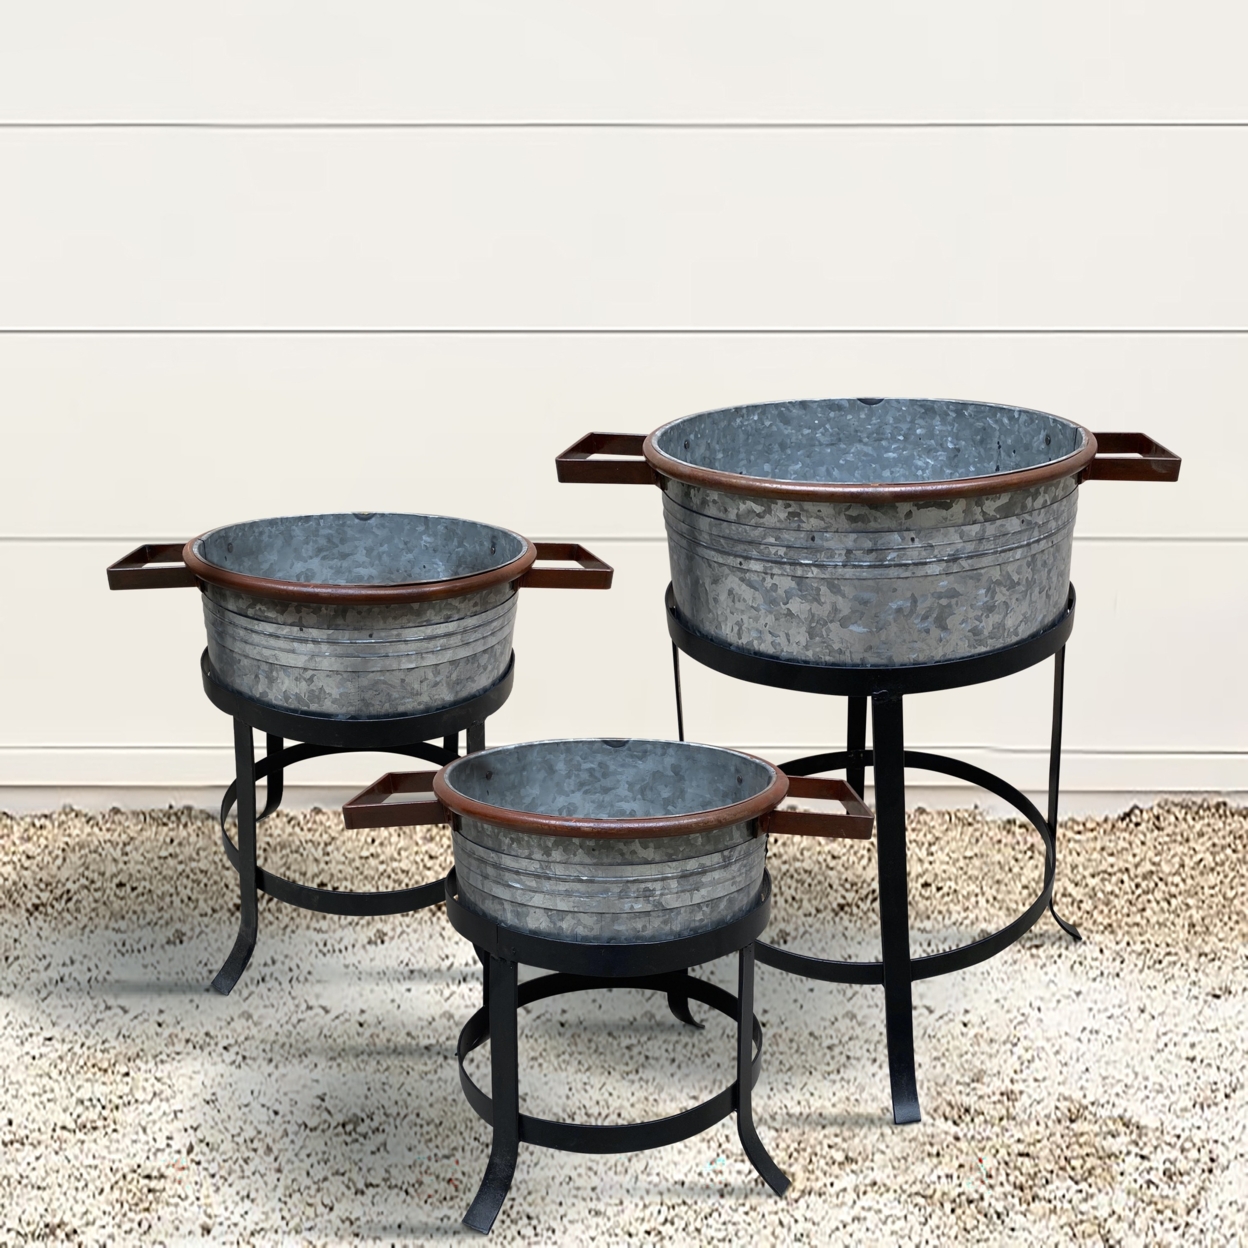 21, 18, And 16 Inch 3 Piece Round Tub Metal Planter Set With Stand In Galvanized Gray And Black Iron- Saltoro Sherpi